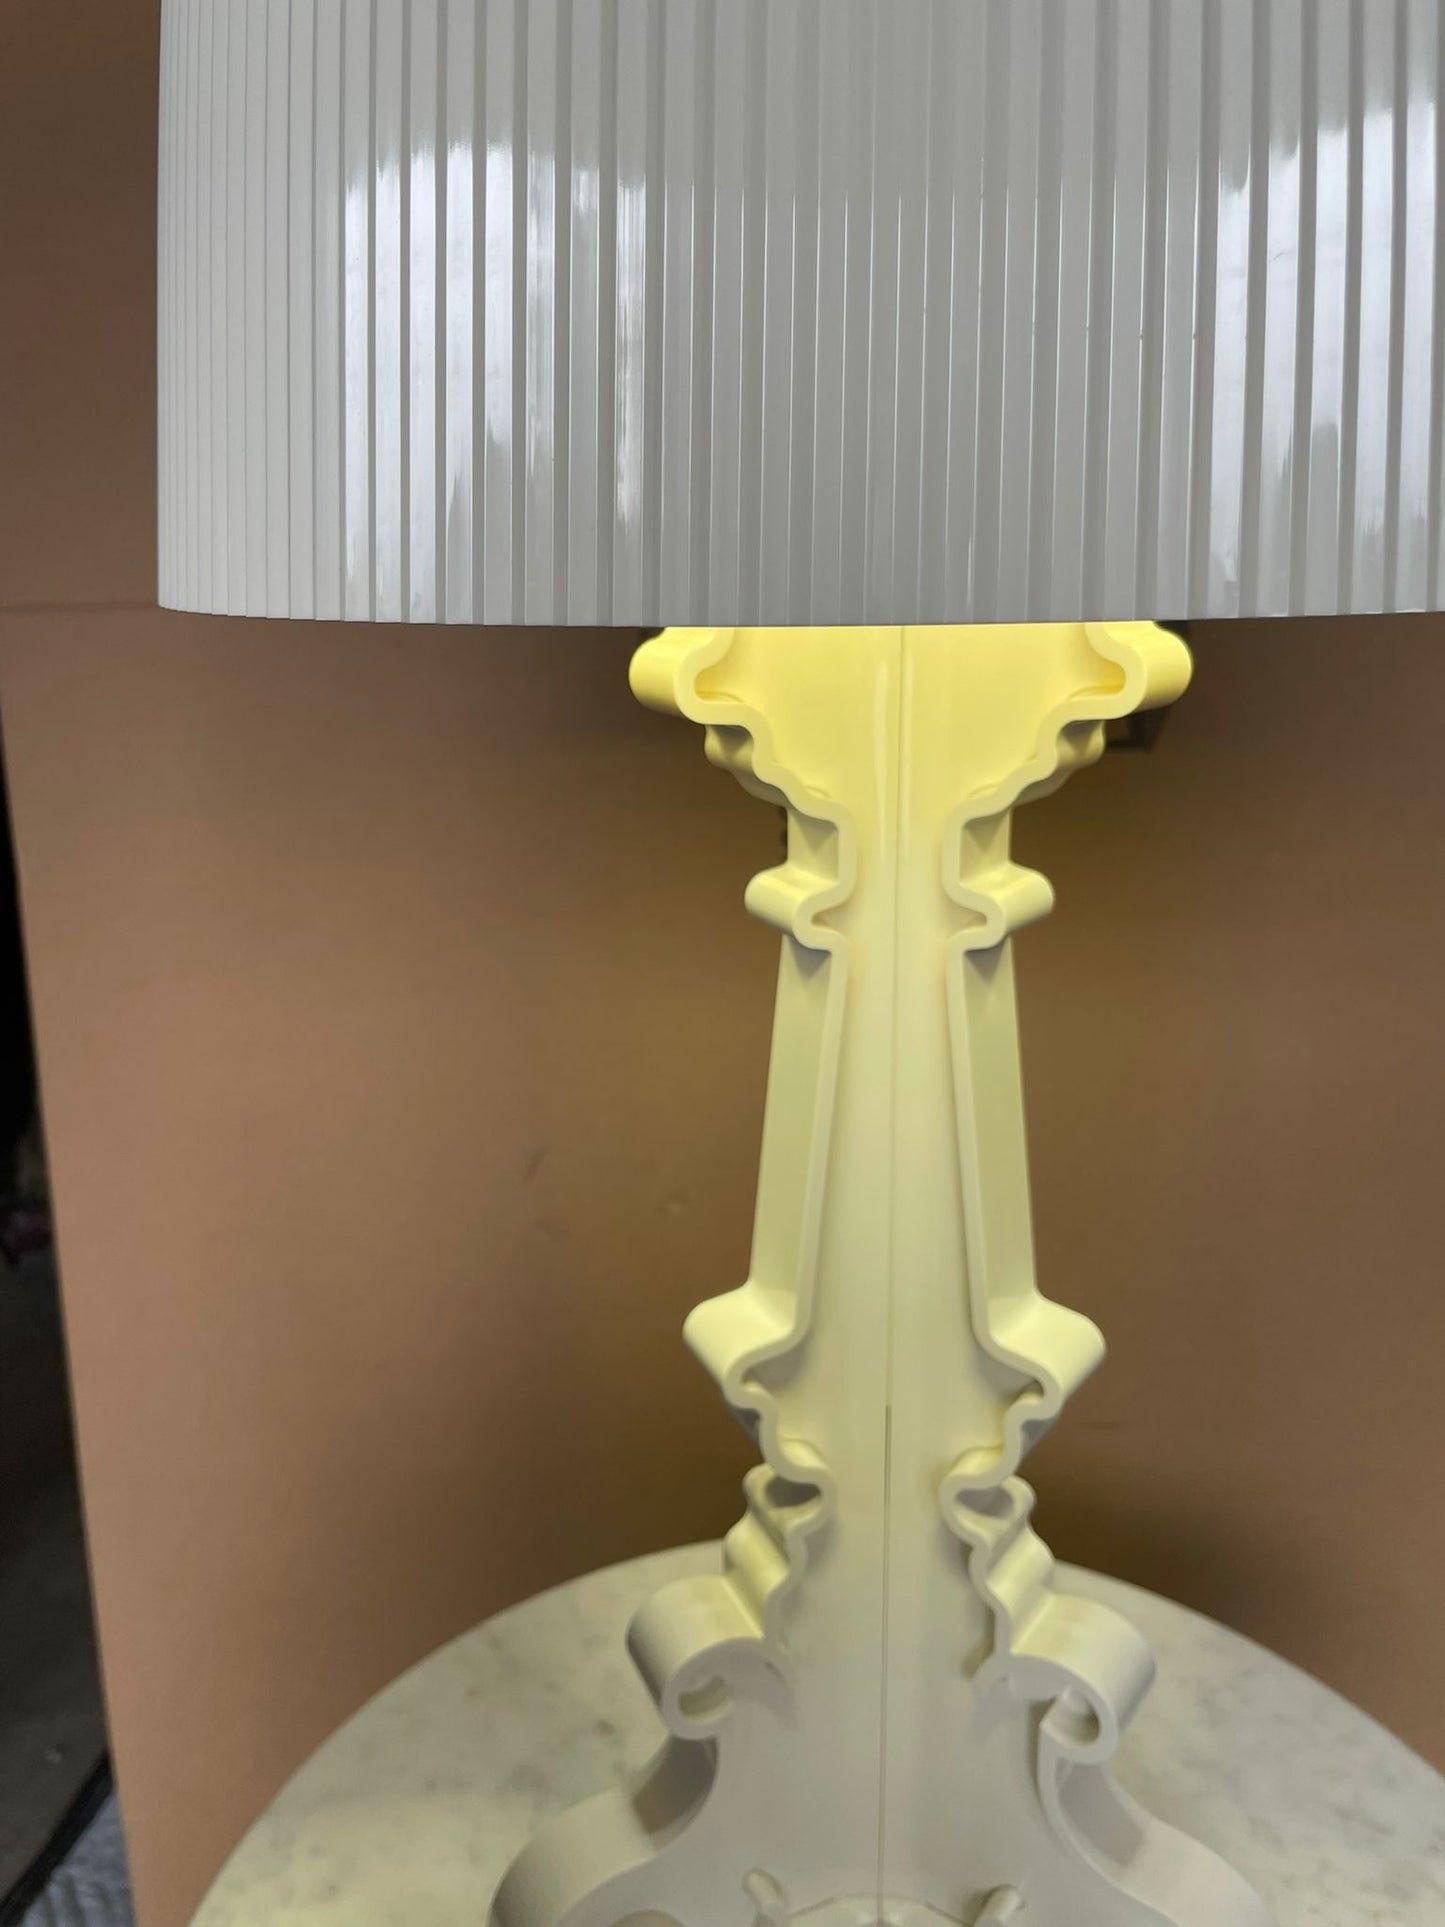 Bourgie Table Lamp by Kartell